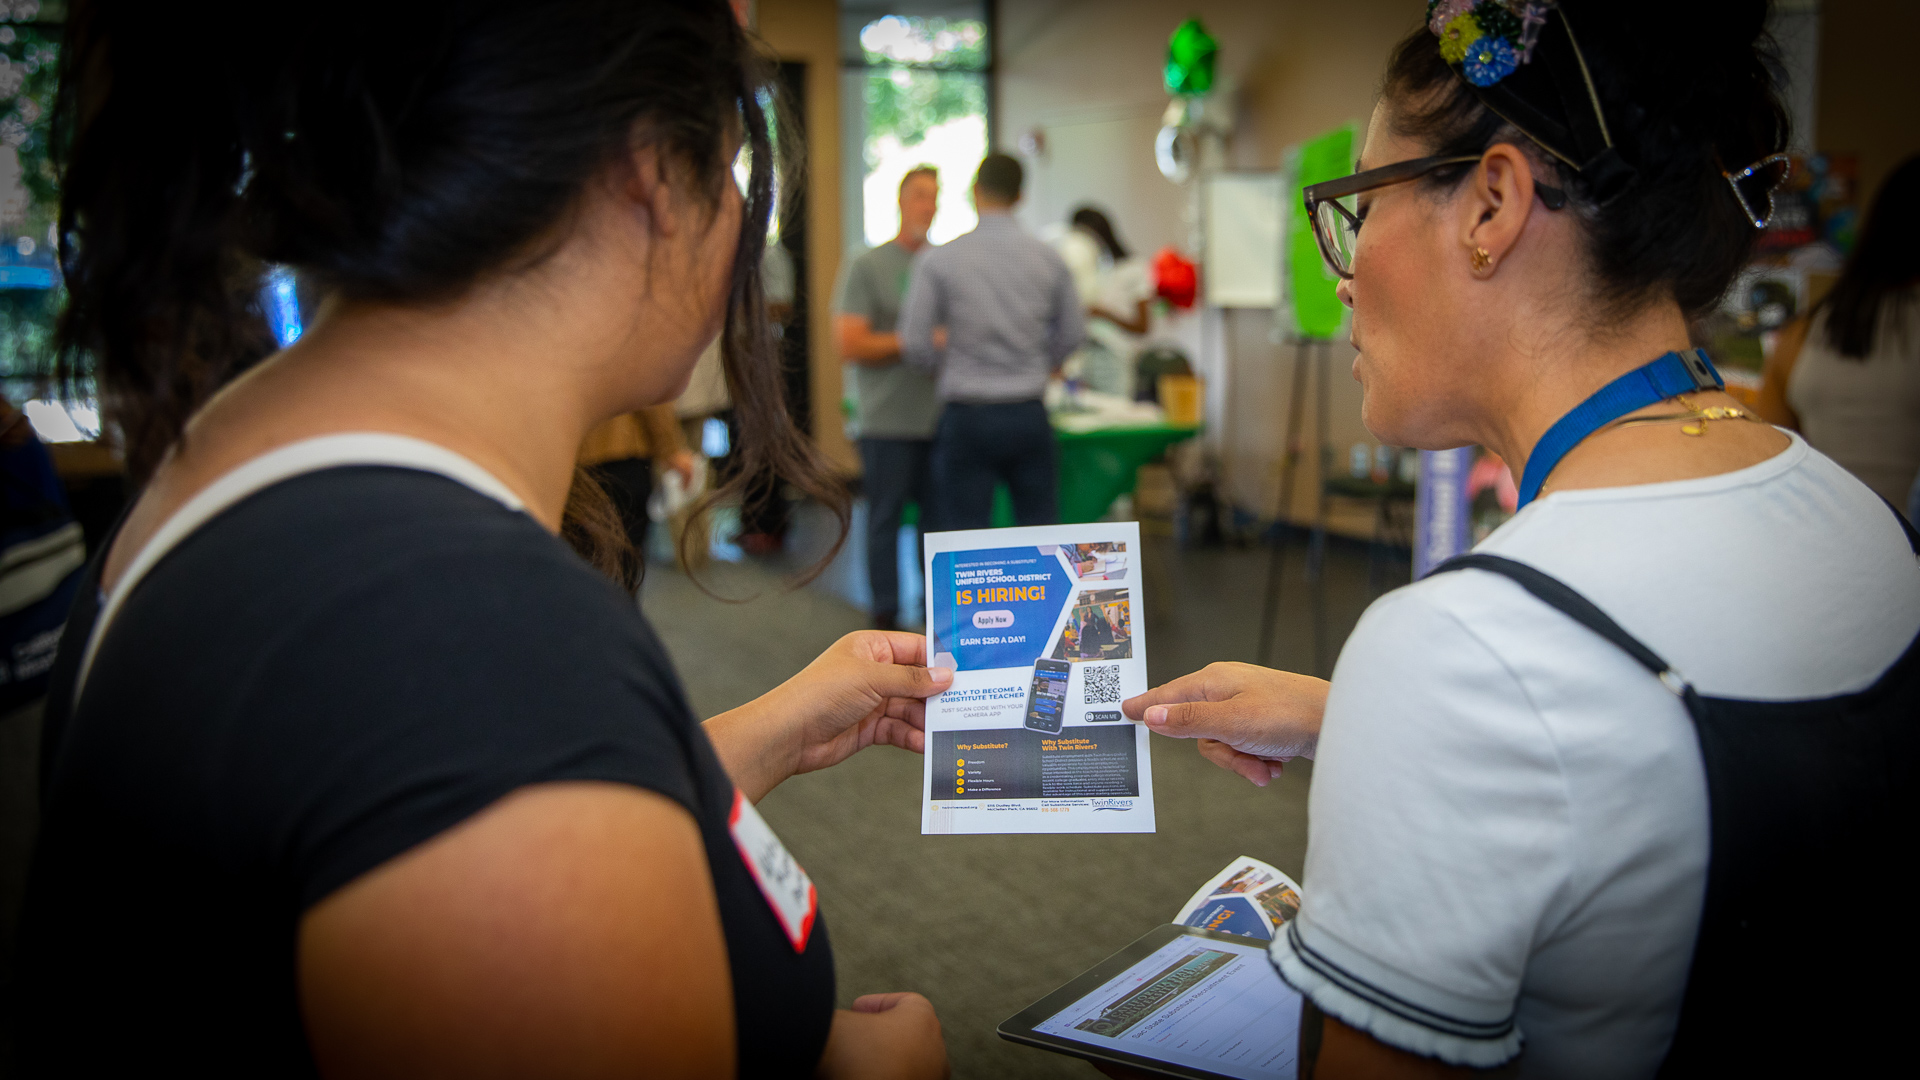 Valeria Miranda, a recent Sac State University graduate, speaks with a representative from the Twin Rivers Unified School District in a black shirt, light blue top and overalls, and the two hold substitute teacher recruitment sheets. increase.